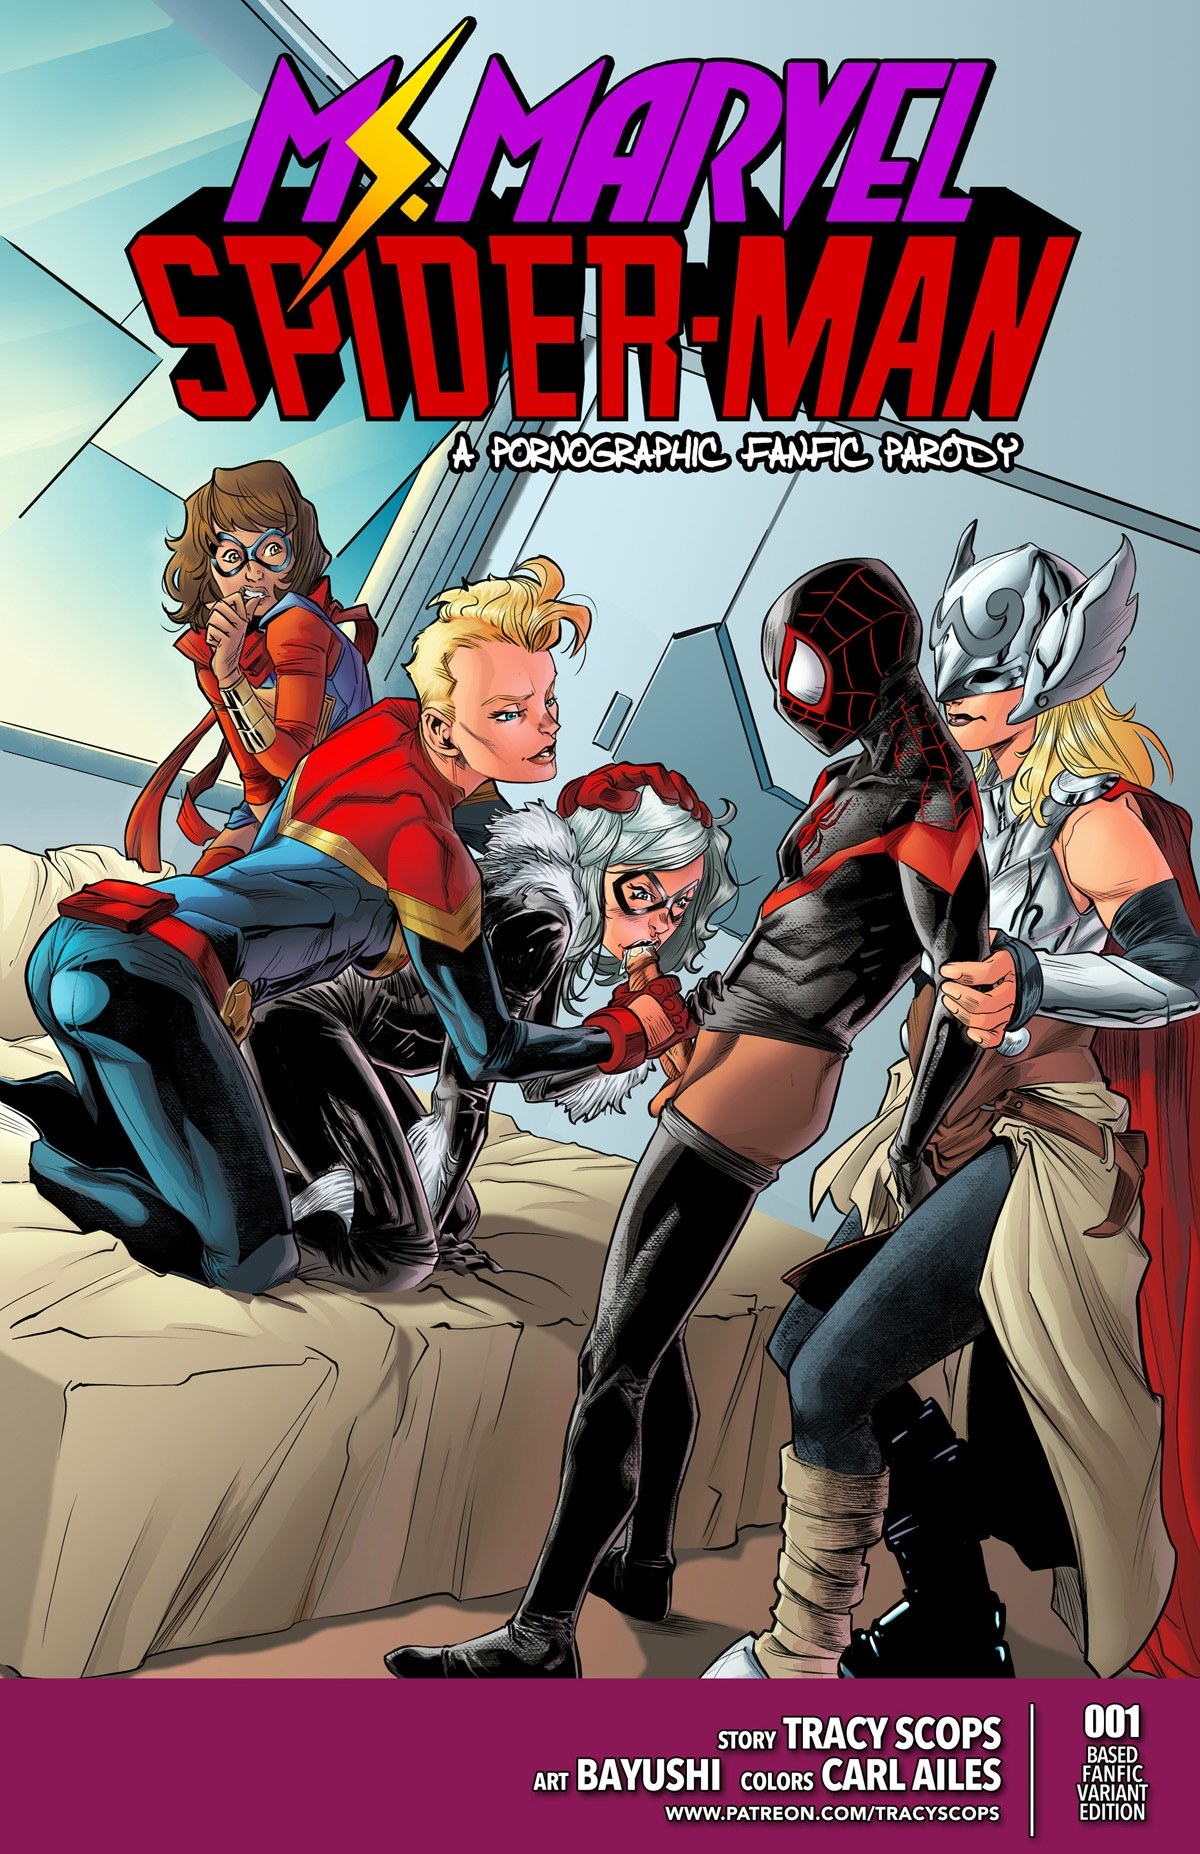 New comic by Tracy Scops - Miss Marvel Spider Man - English/Spanish Porn Comic